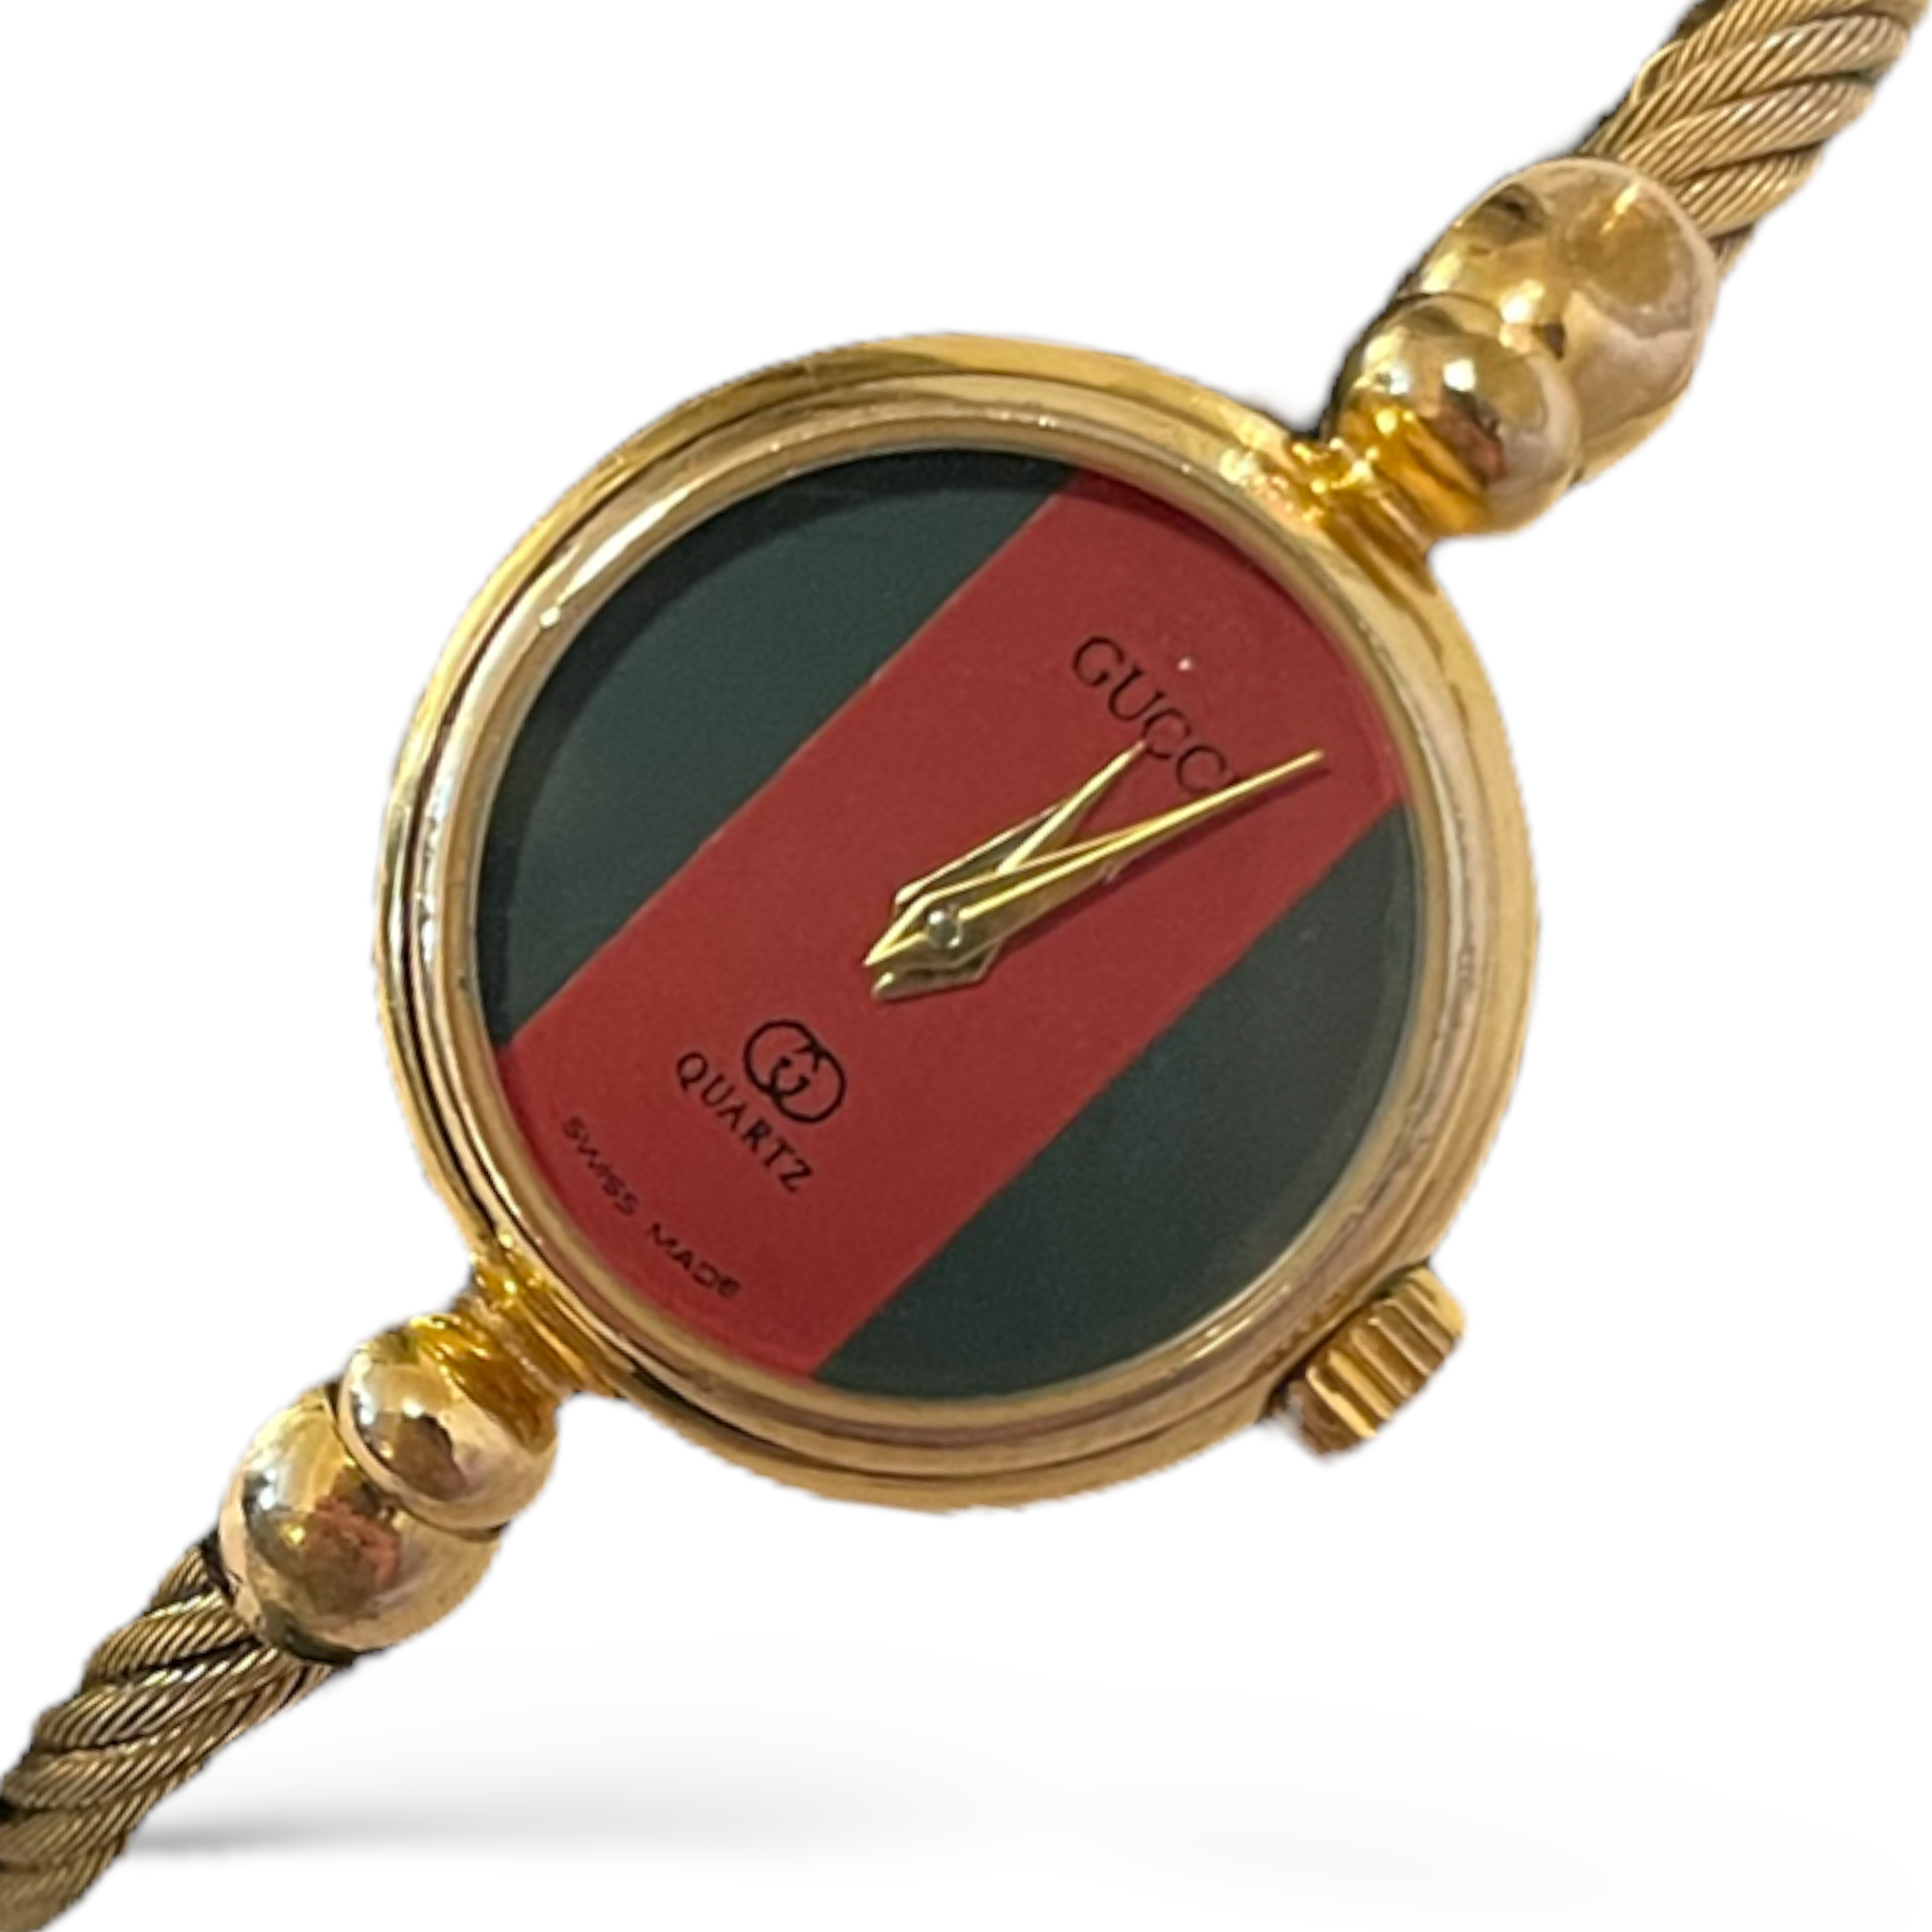 GUCCI Vintage Ladies' Bangle Bracelet Watch with Signature Red & Green Motif Dial |20mm|